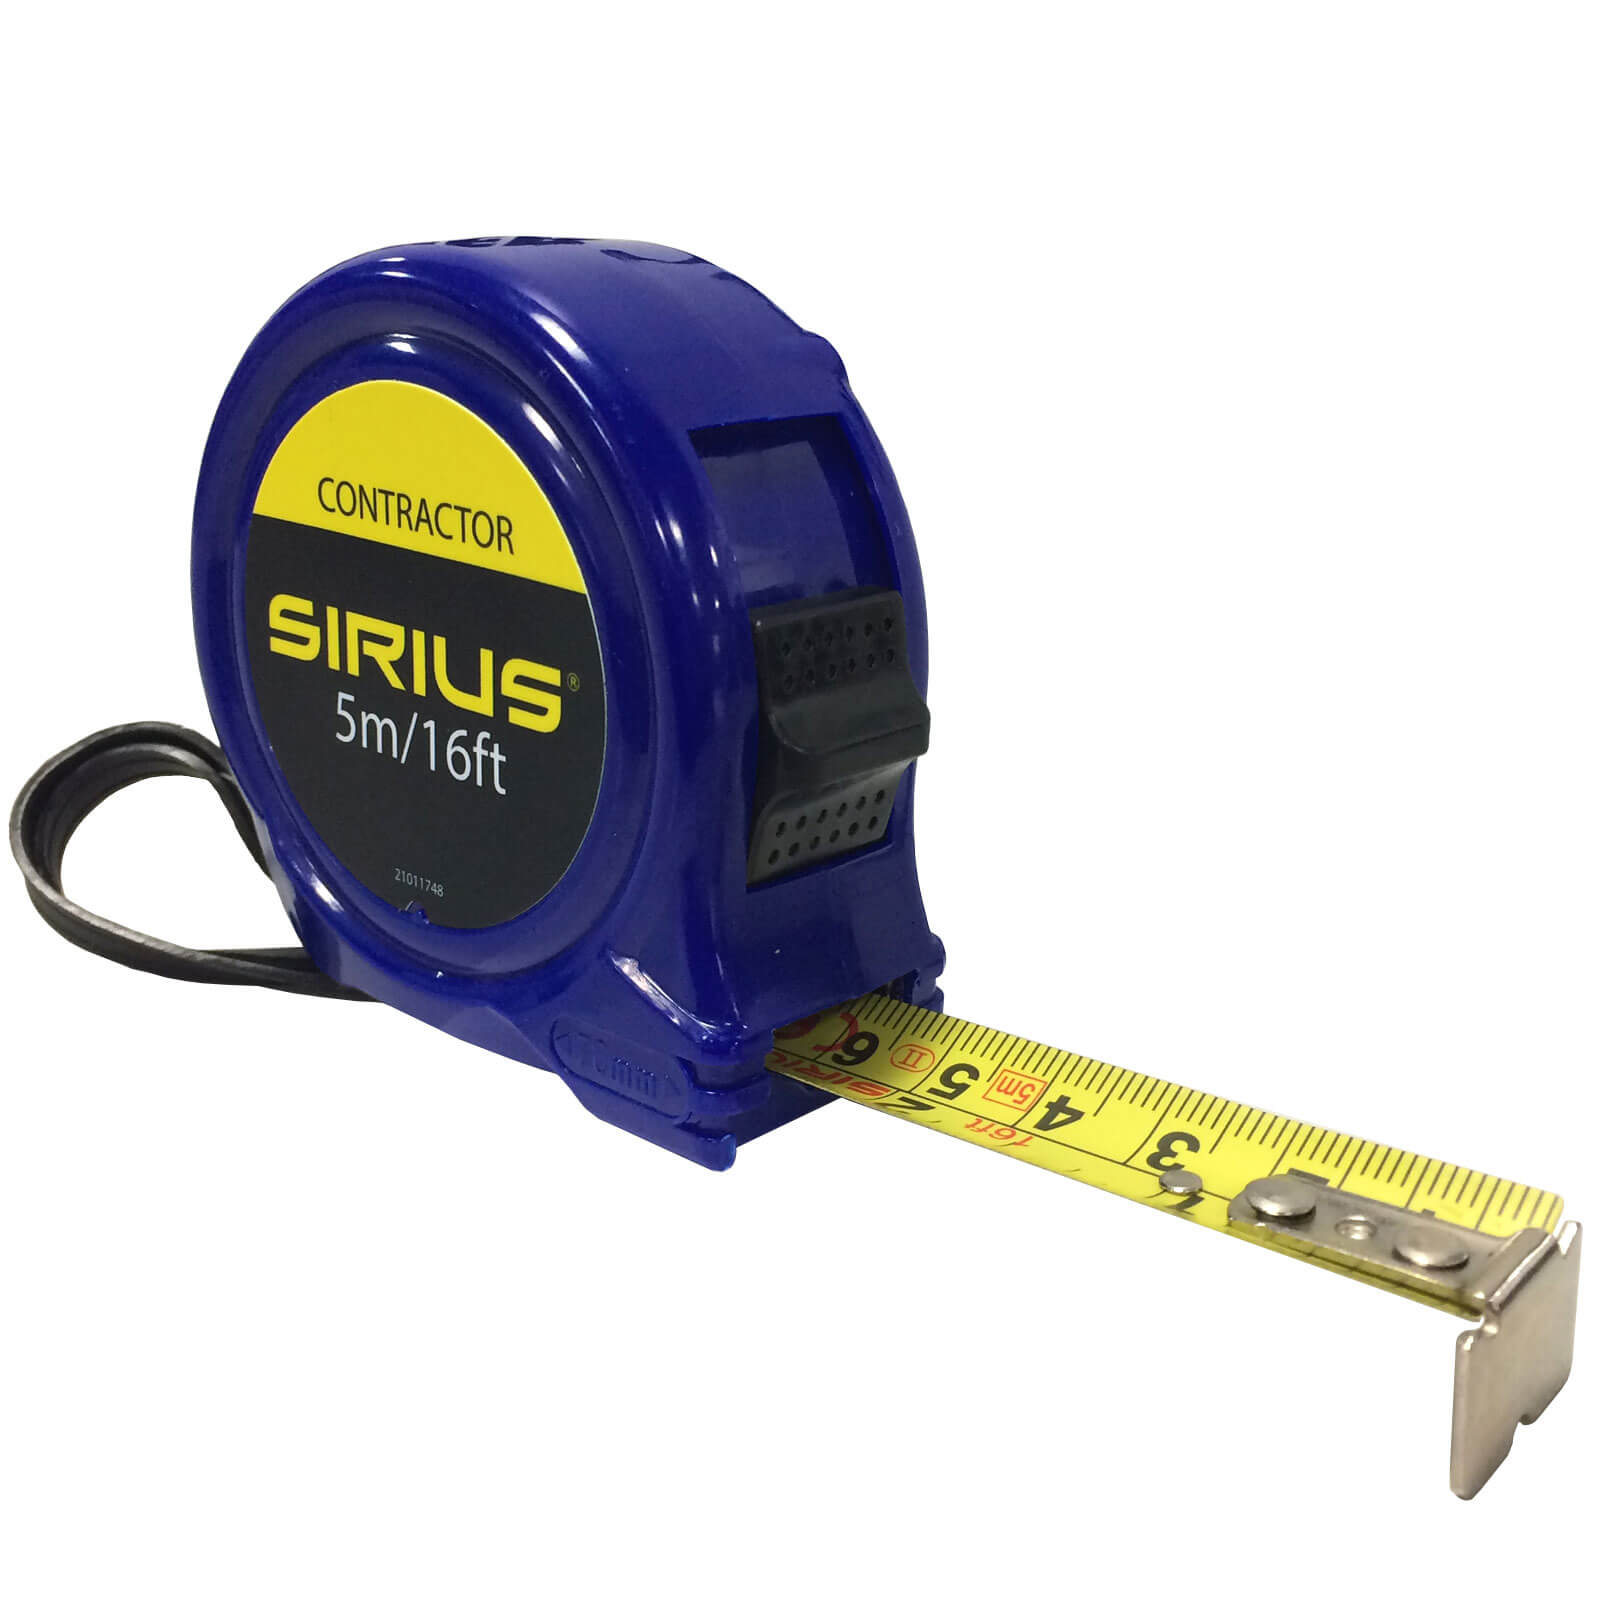 Image of Sirius Contractor Tape Measure Imperial & Metric 16ft / 5m 19mm